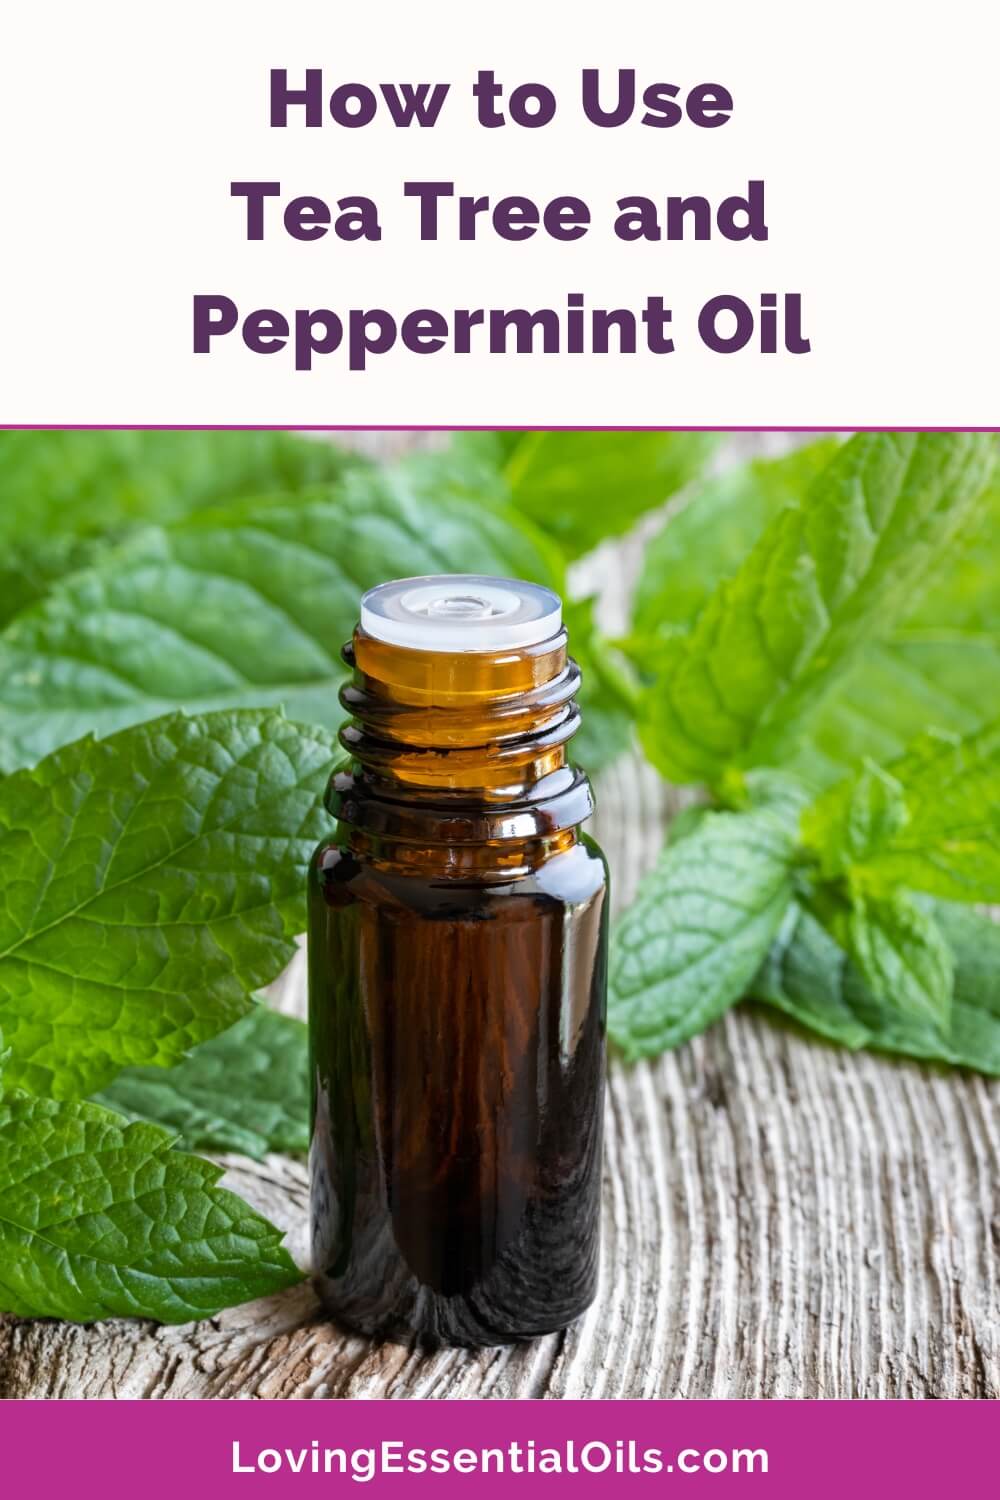 How to Use Tea Tree and Peppermint Oil by Loving Essential Oils